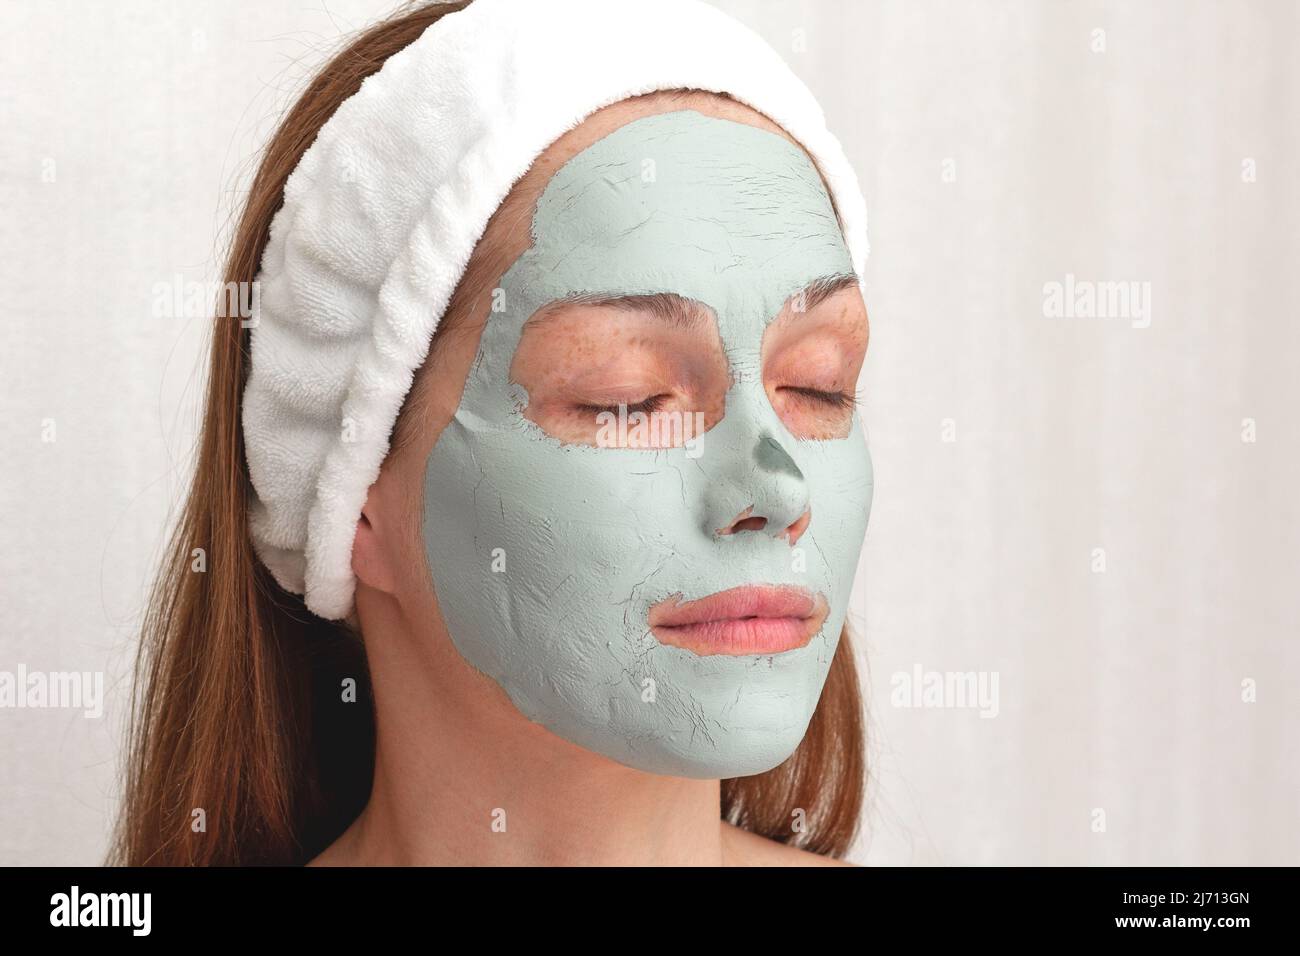 Woman with white band on head with blue dry clay mask on face with closed eyes over white background Stock Photo